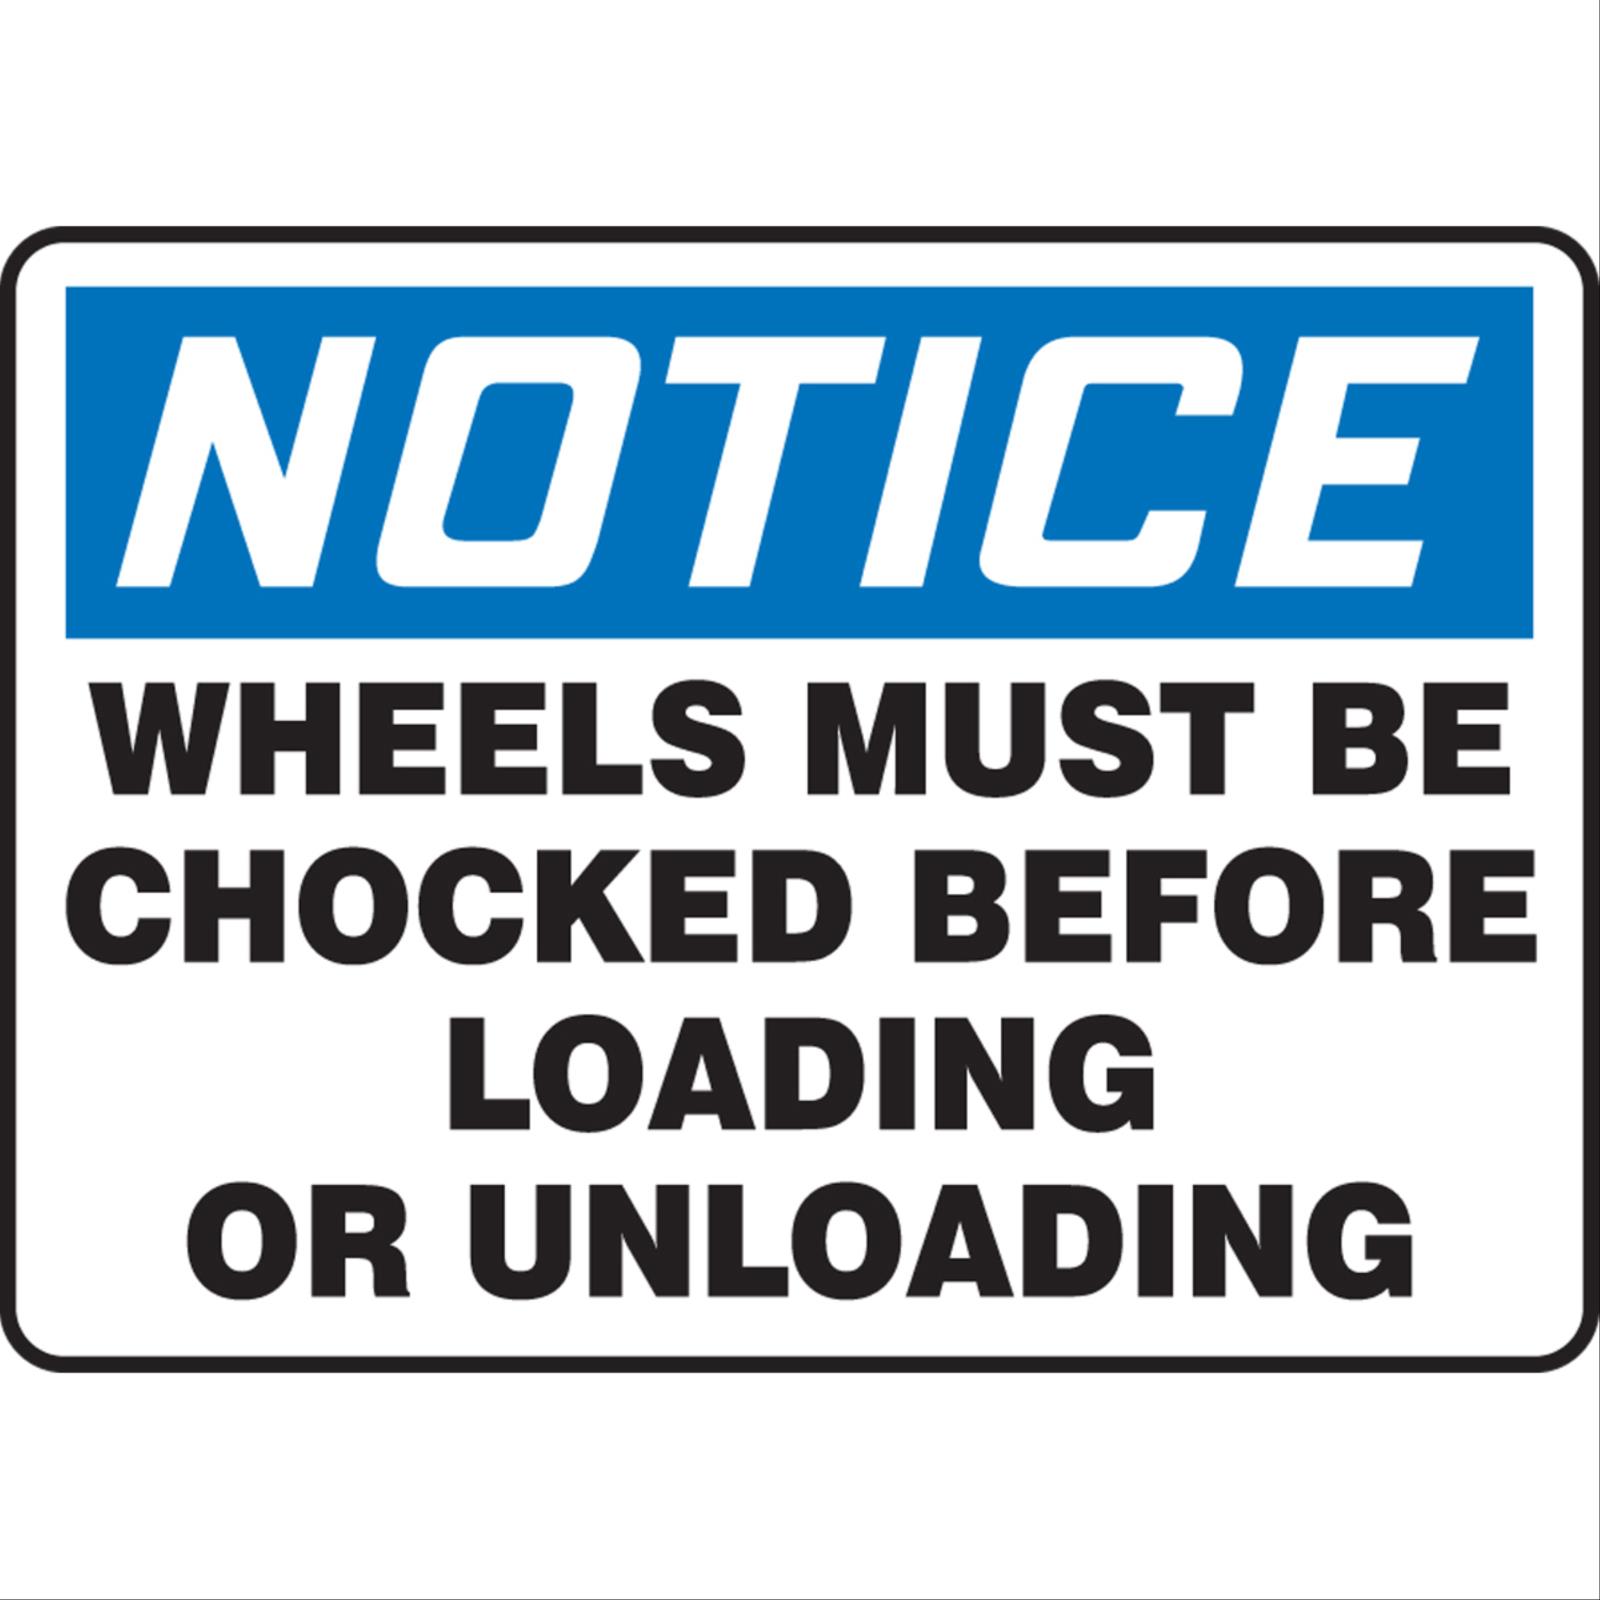 Notice Wheels Must Be Chocked Before Loading Or Unloading Signs